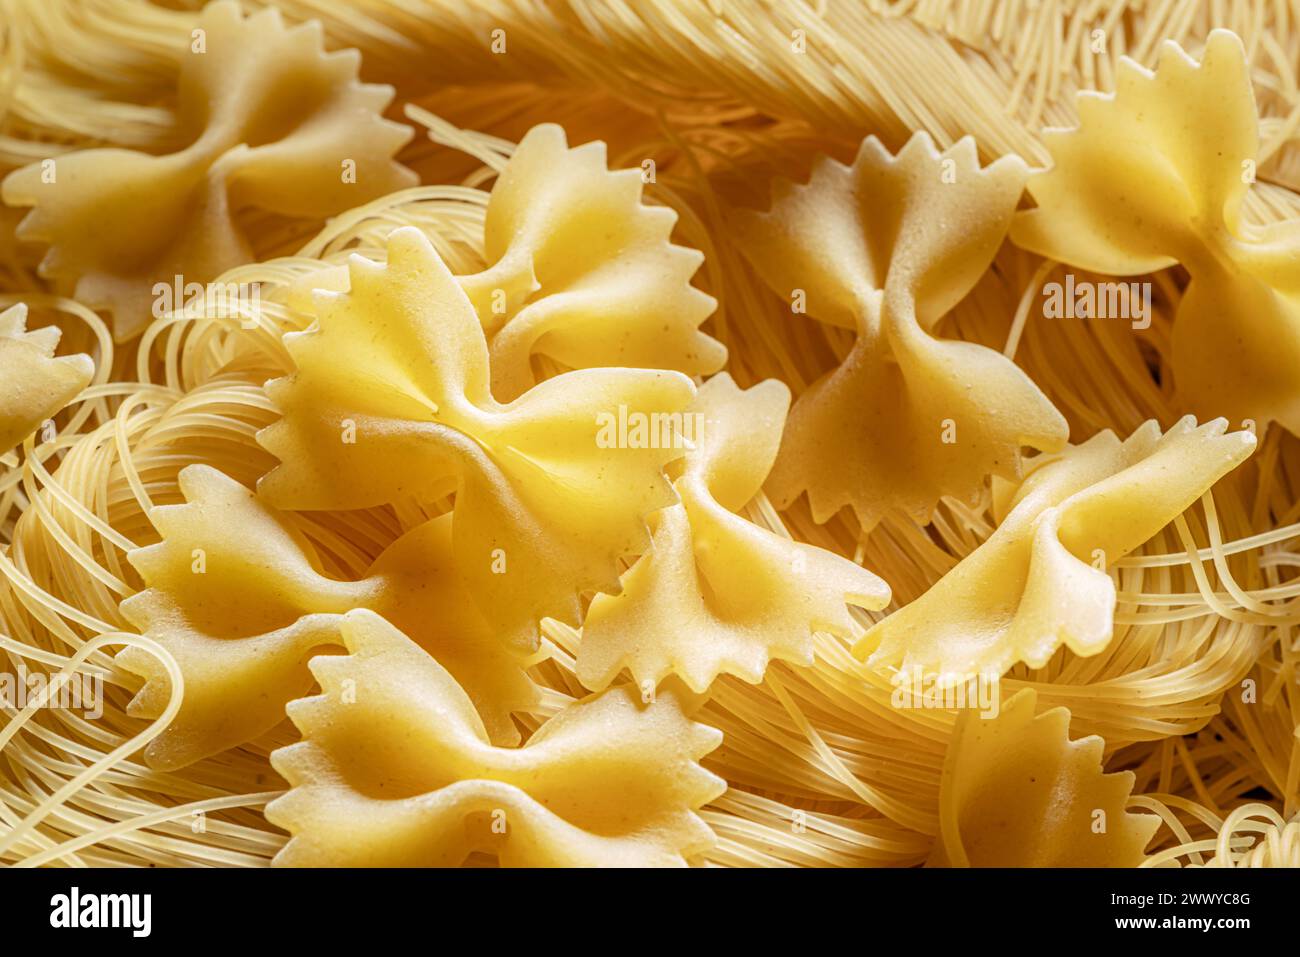 Italian pasta farfalle and vermicelli close-up. Food background. Stock Photo